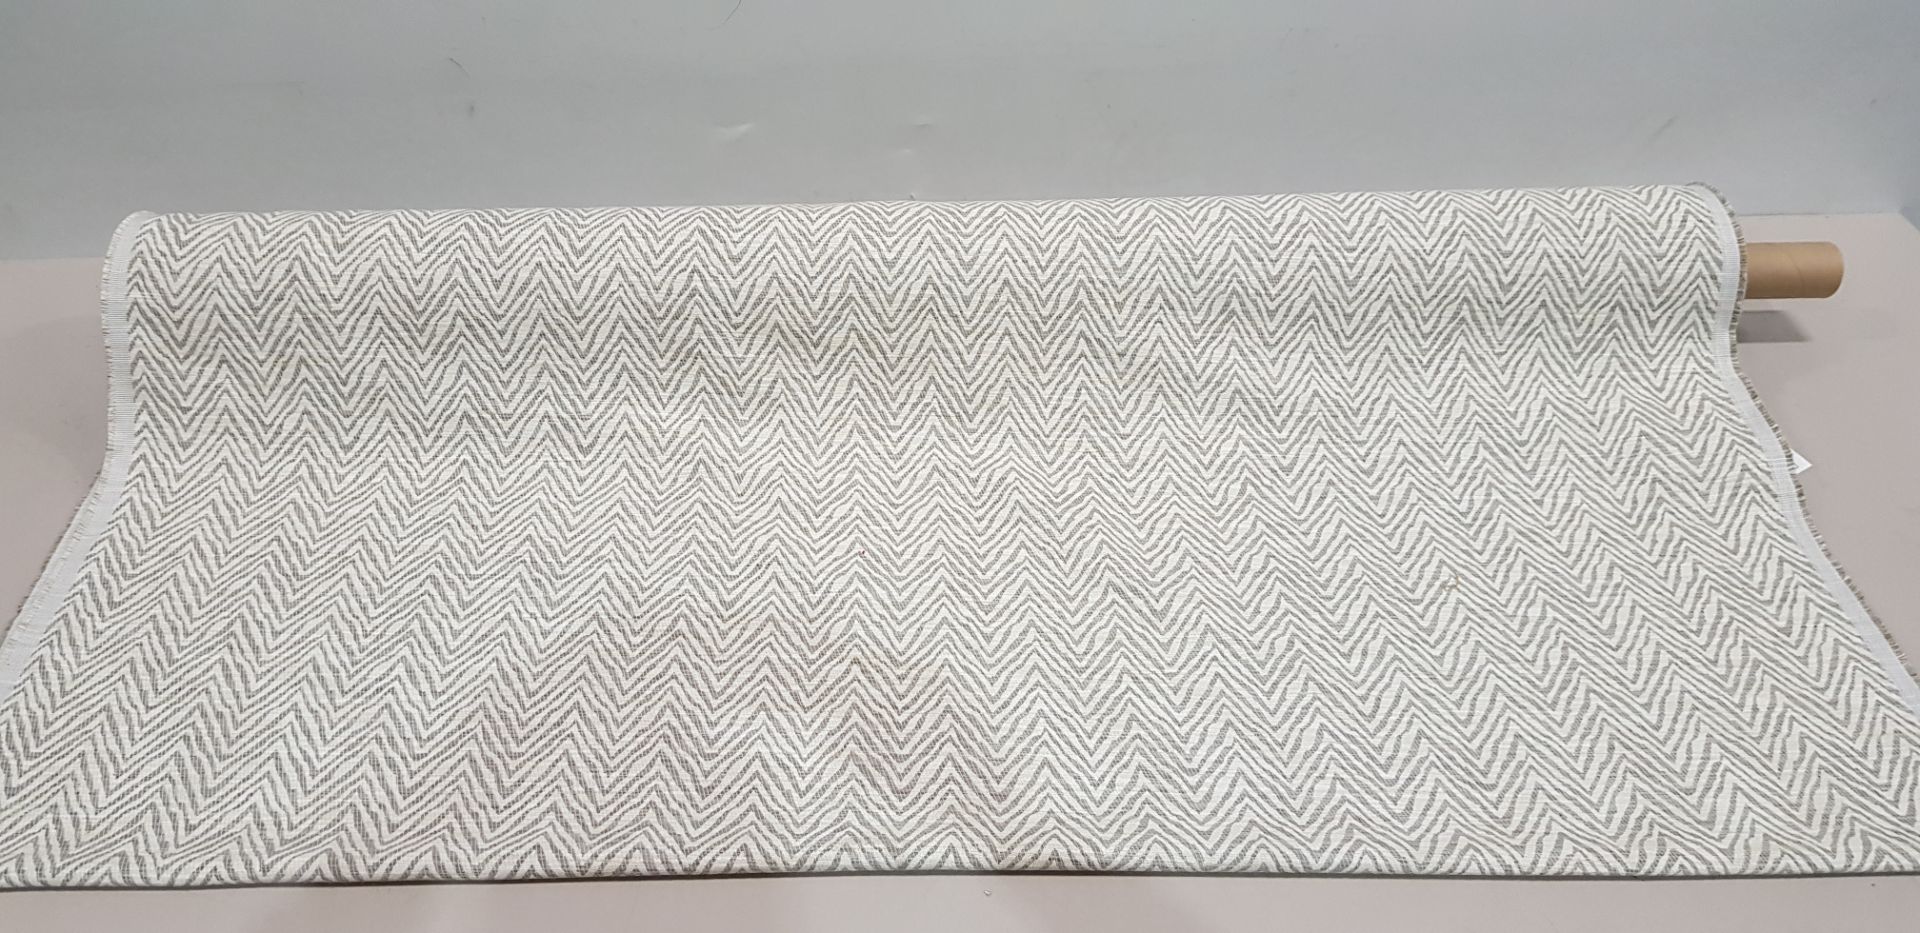 1 X ONE ROLL OF JACQUARD CURTAIN FABRIC DESIGN - NAGOA COLOURWAY - IVORY WIDTH 137 CM - APPROX 20